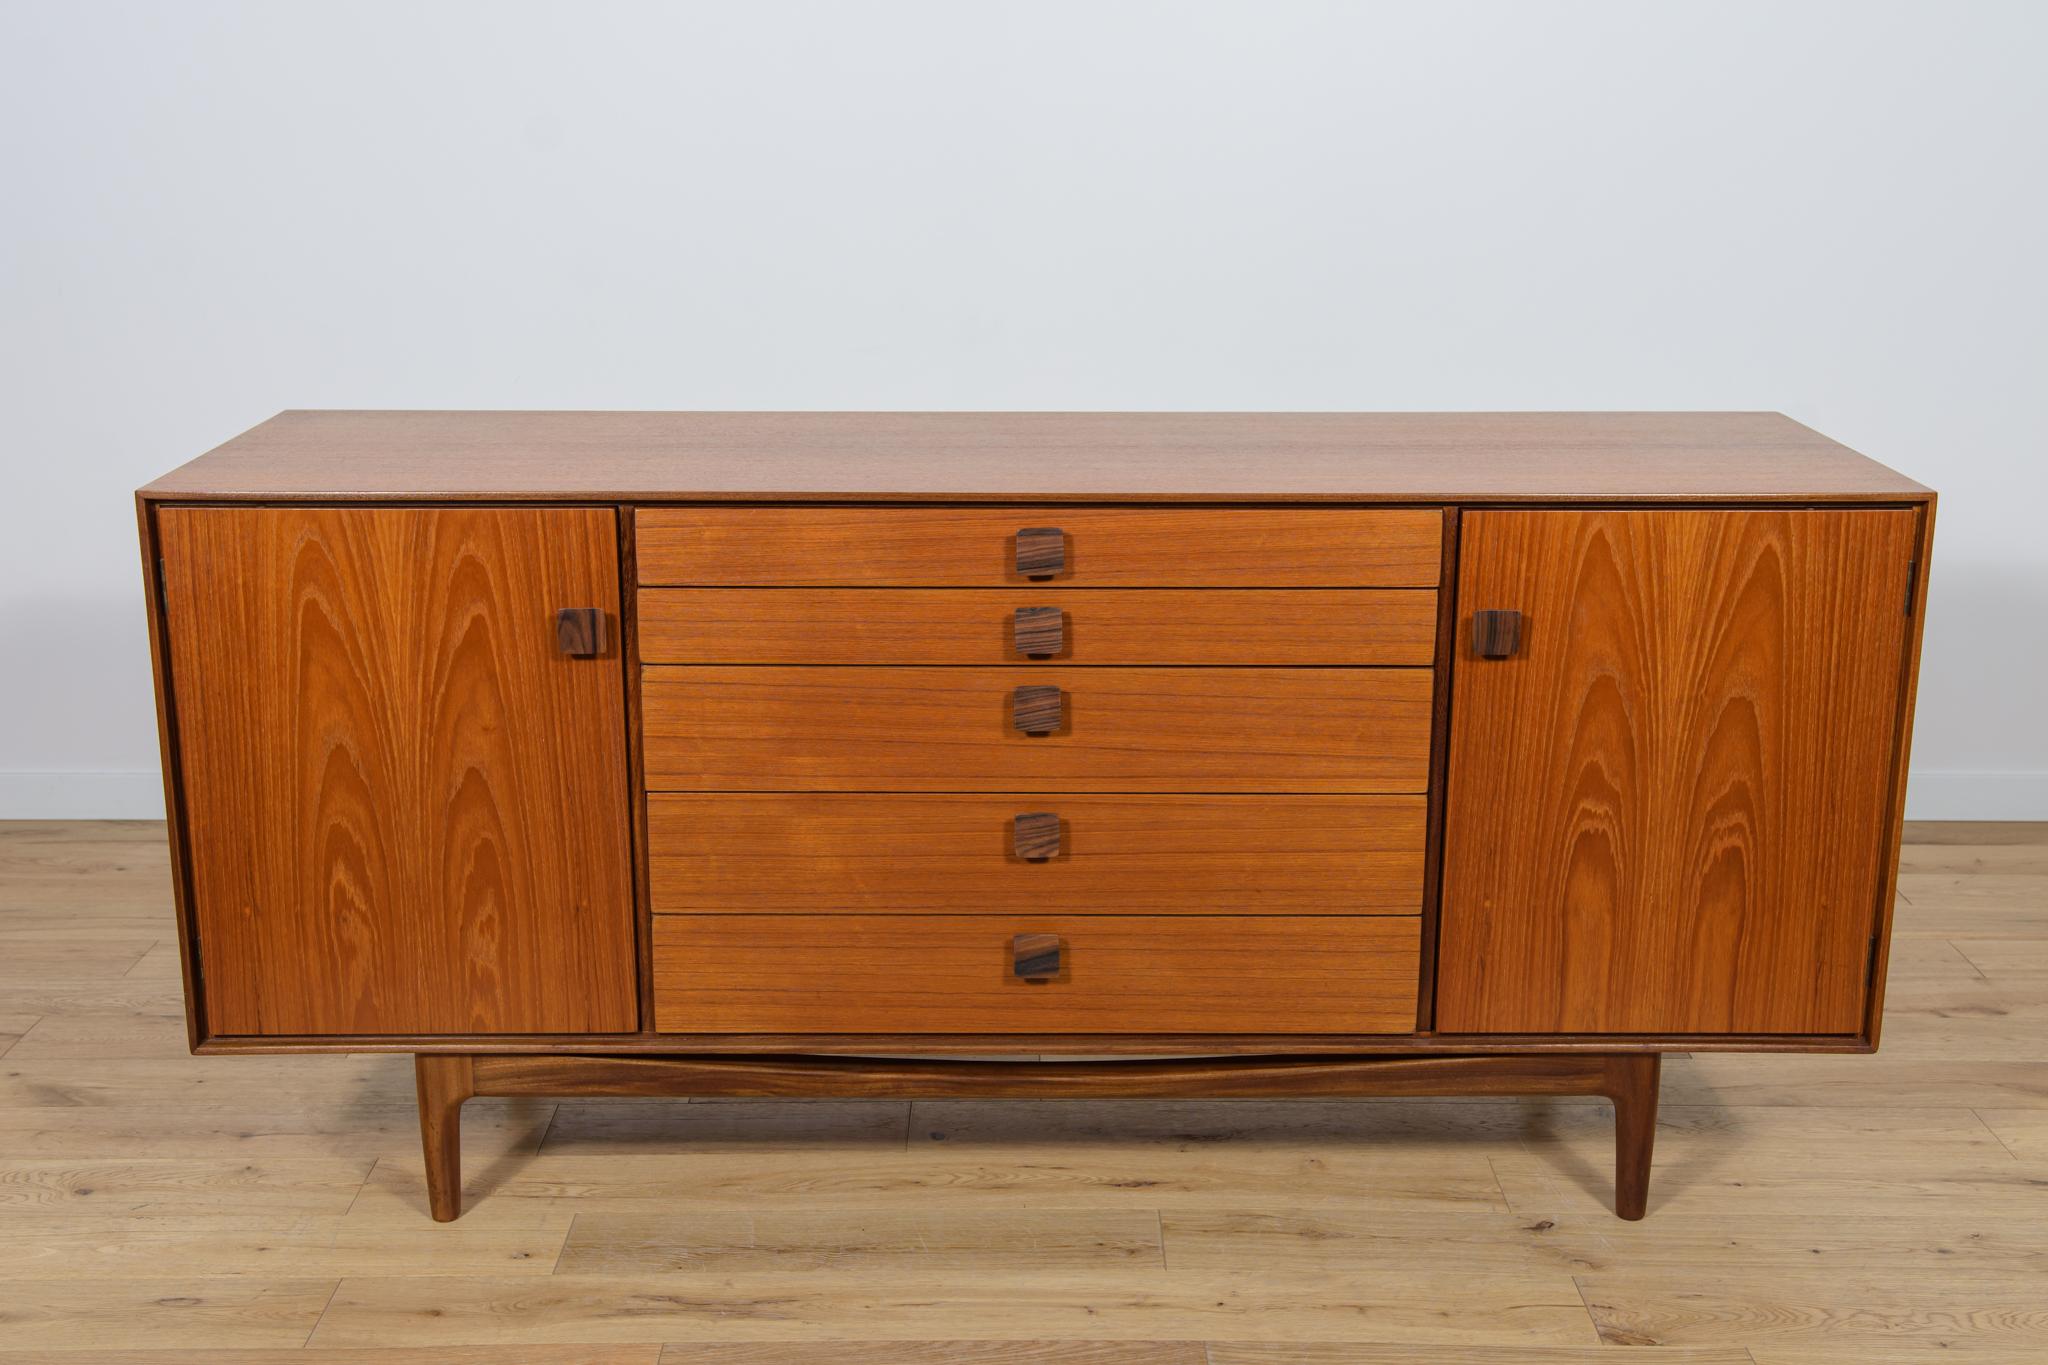 This magnificent mid-century Danish design sideboard credenza was designed by Ib Kofod-Larsen and manufactured by G-Plan circa 1960. It is made of African teak, handles made of rosewood. Features two doors as well as five drawers. Wood elements have